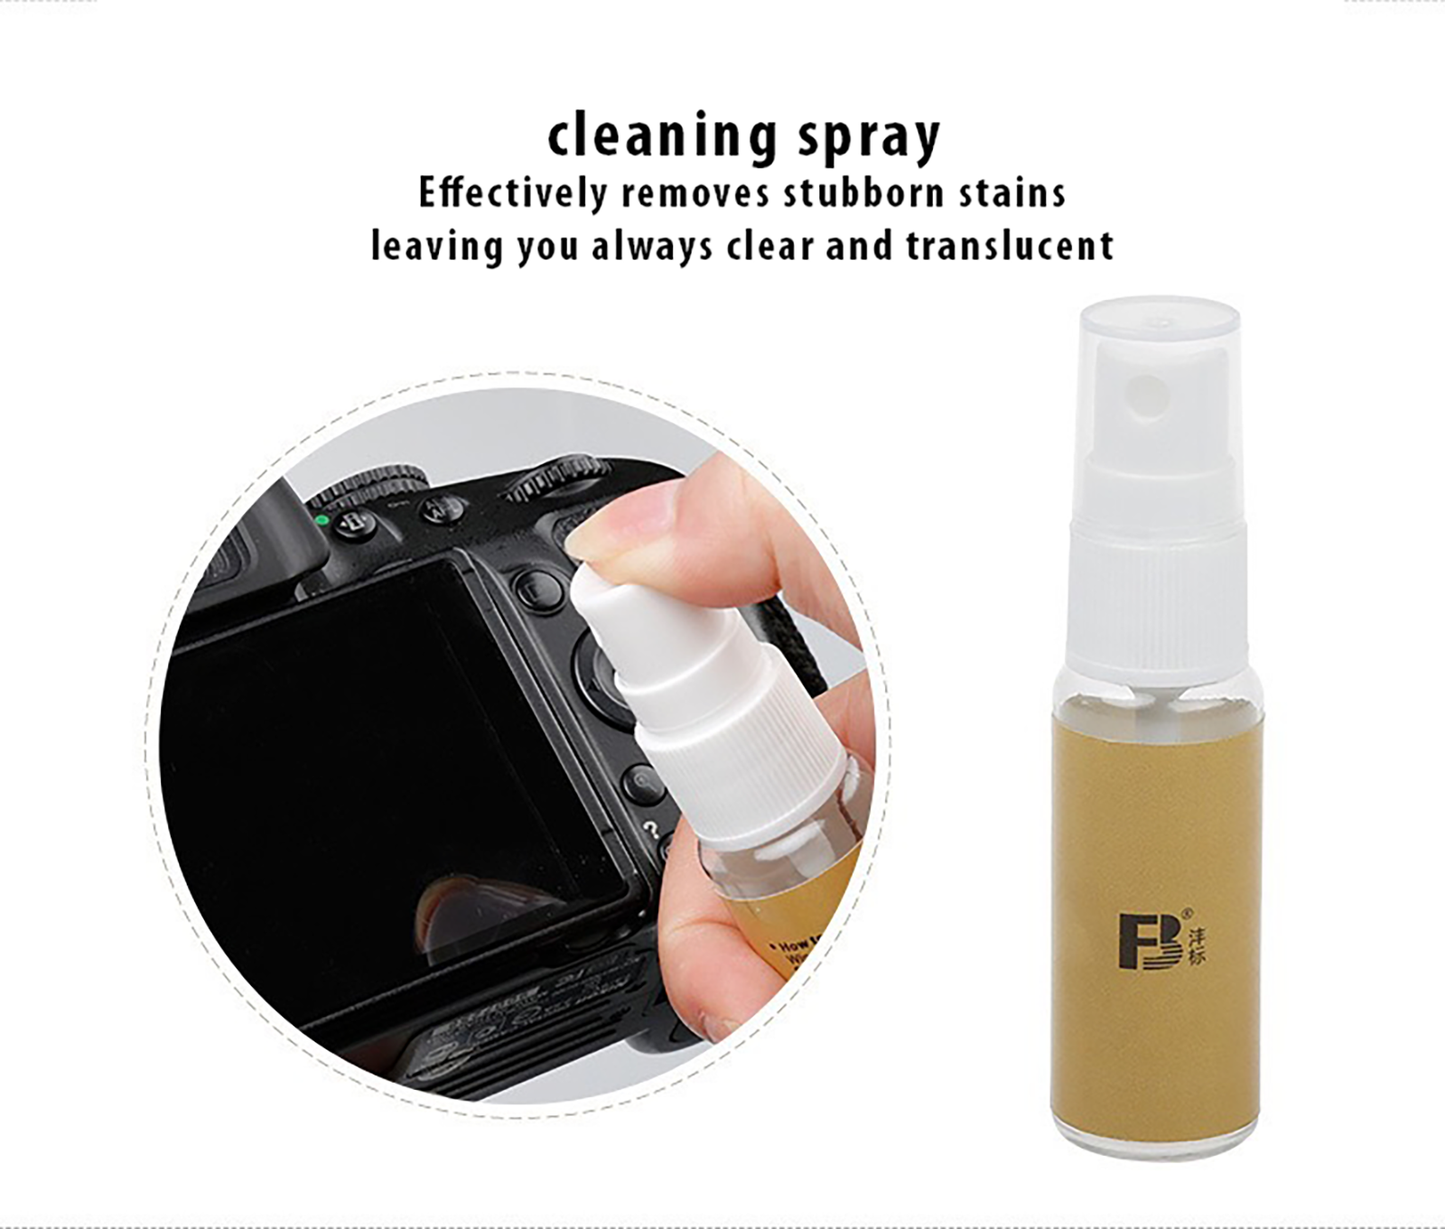 5 in 1 Camera Lens Cleaning Kit with Lens Air Blower/Detergent/Cleaning Cloth/Cleaning Brush/Len Cleaning Paper - starcopia design store